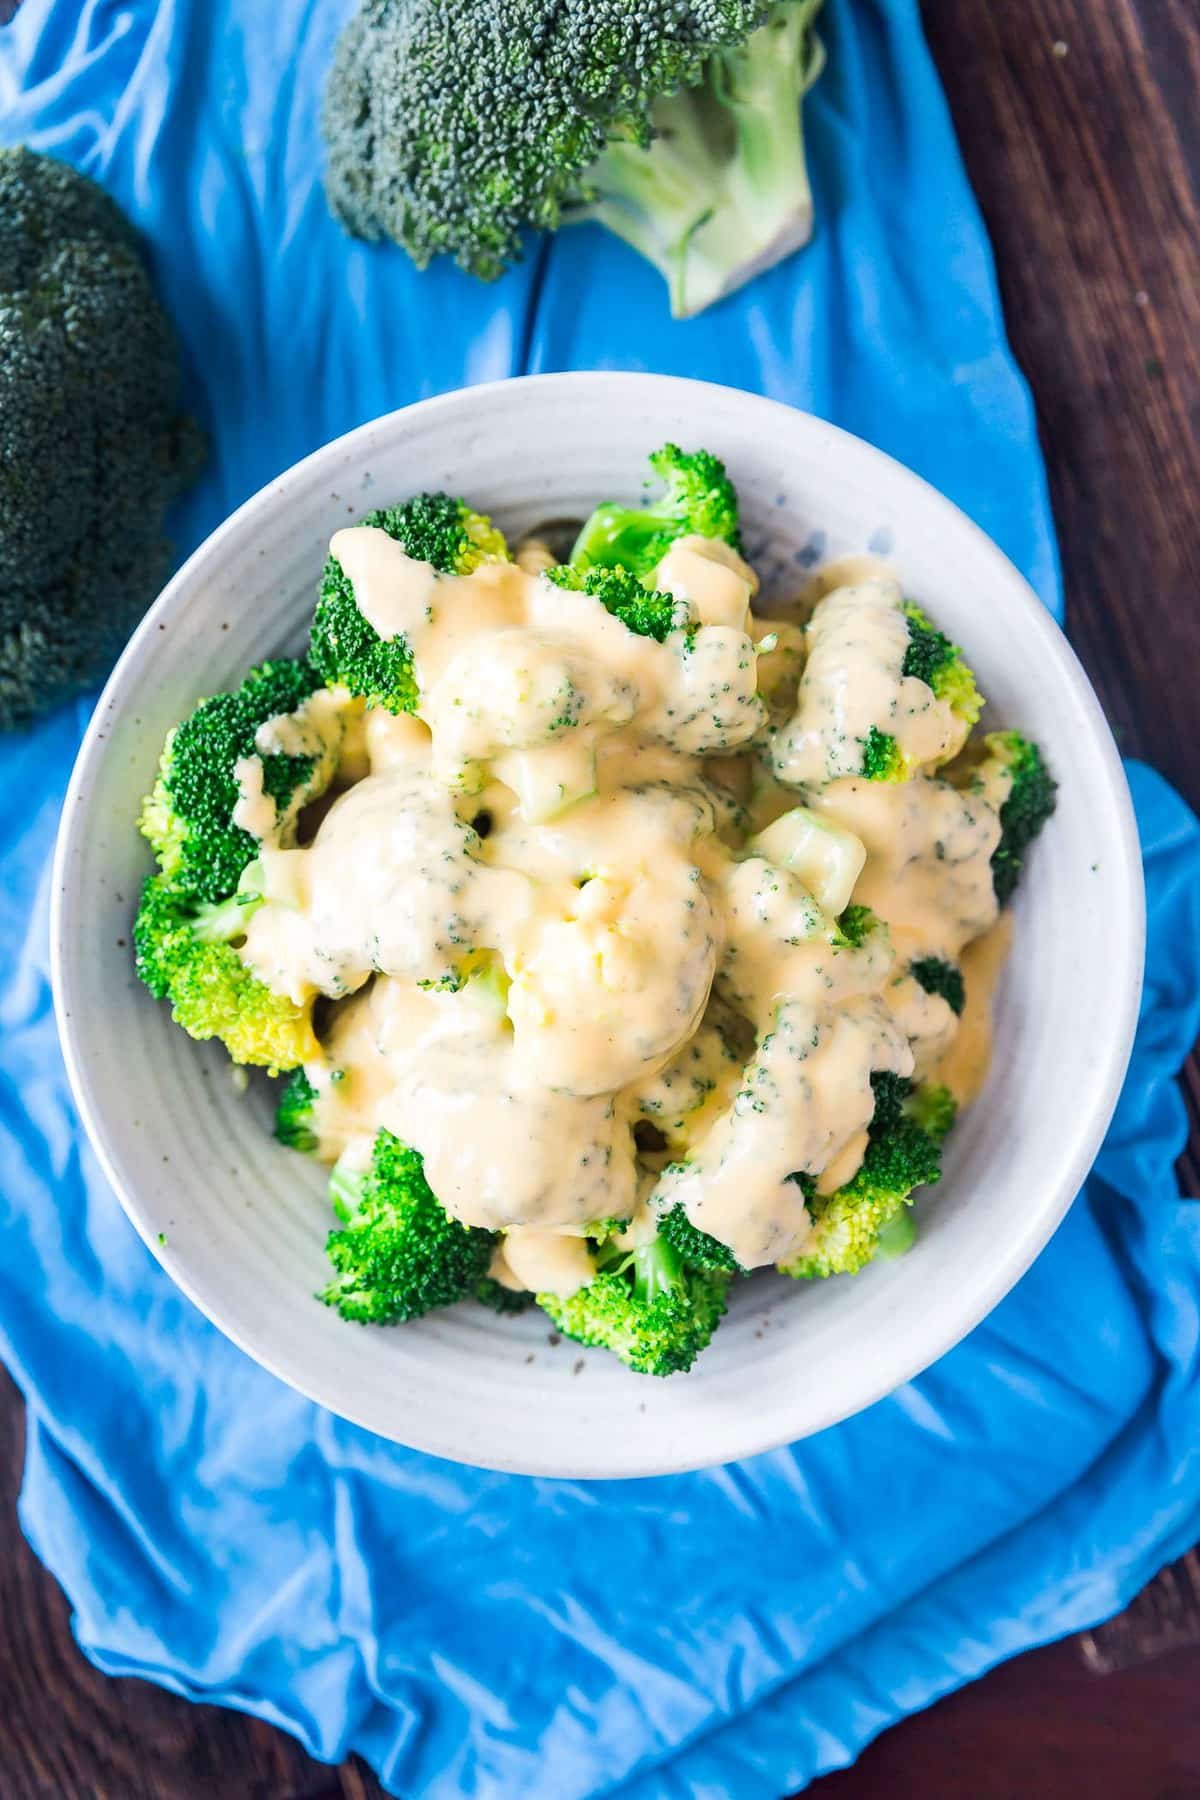 An overhead image of a bowl of steamed broccoli topped with homemade cheese sauce in a gray bowl on a blue napkin.